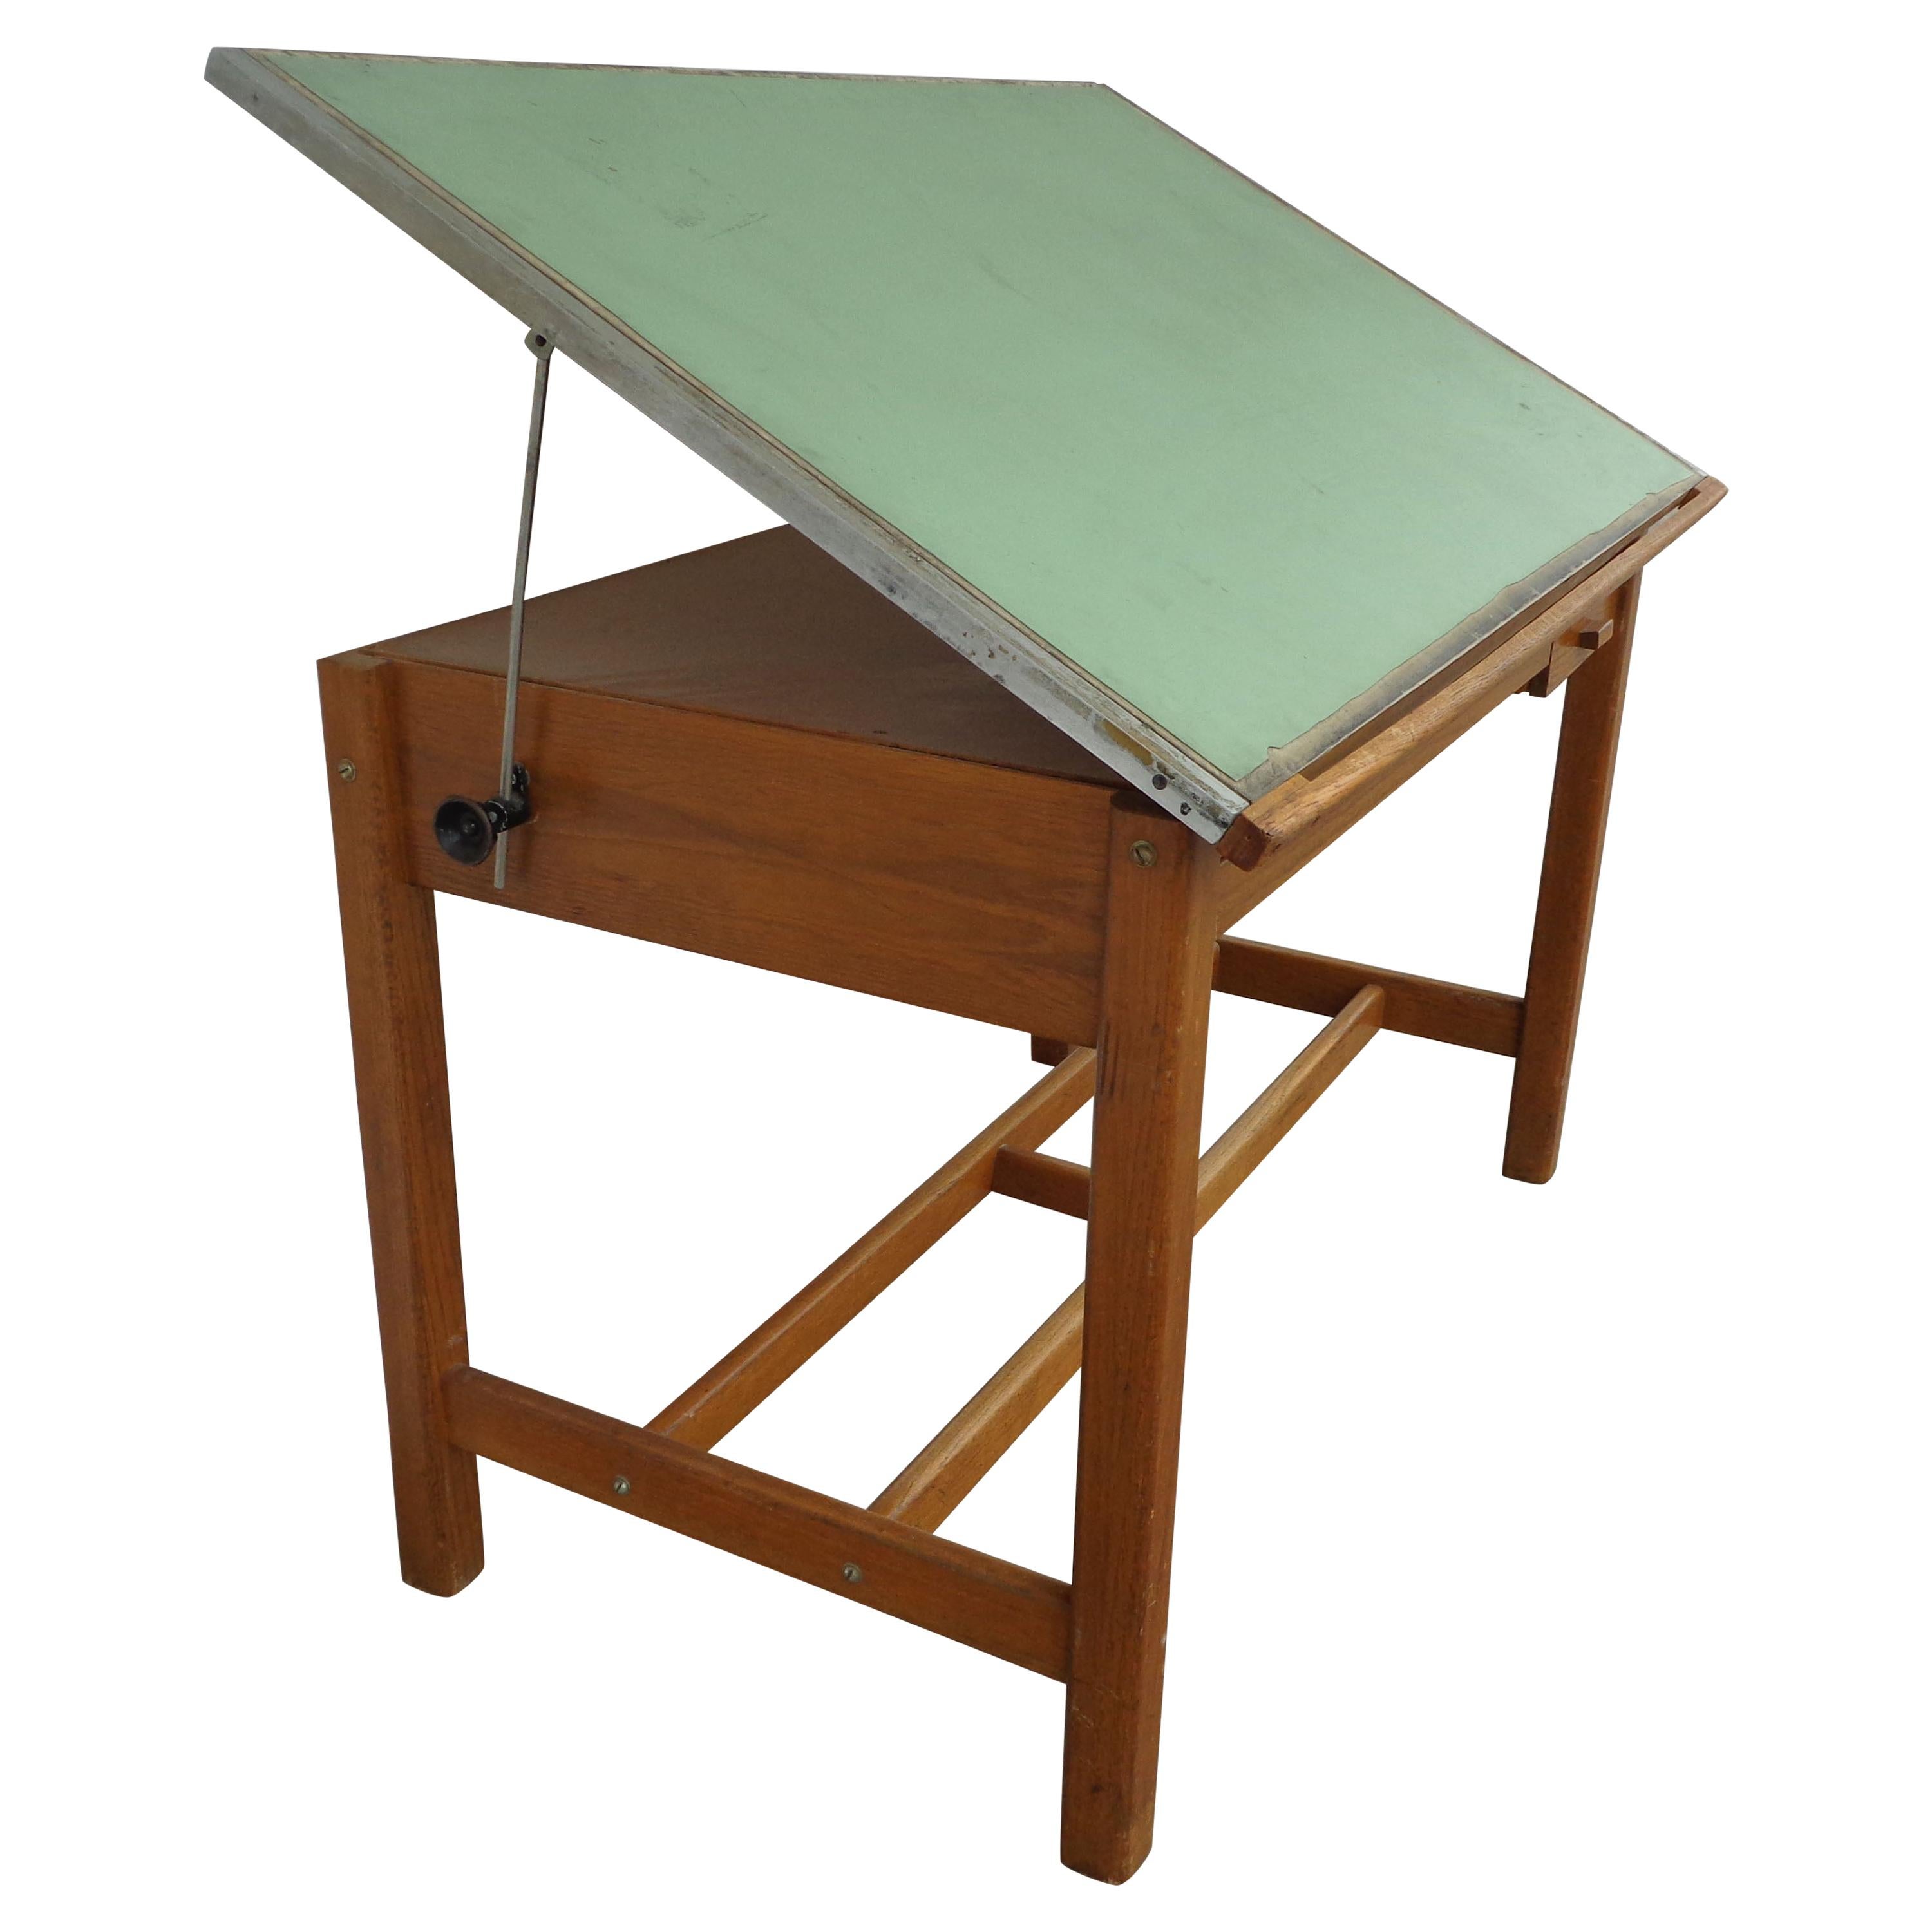 Drafting Tables for sale in Pittsburgh, Pennsylvania